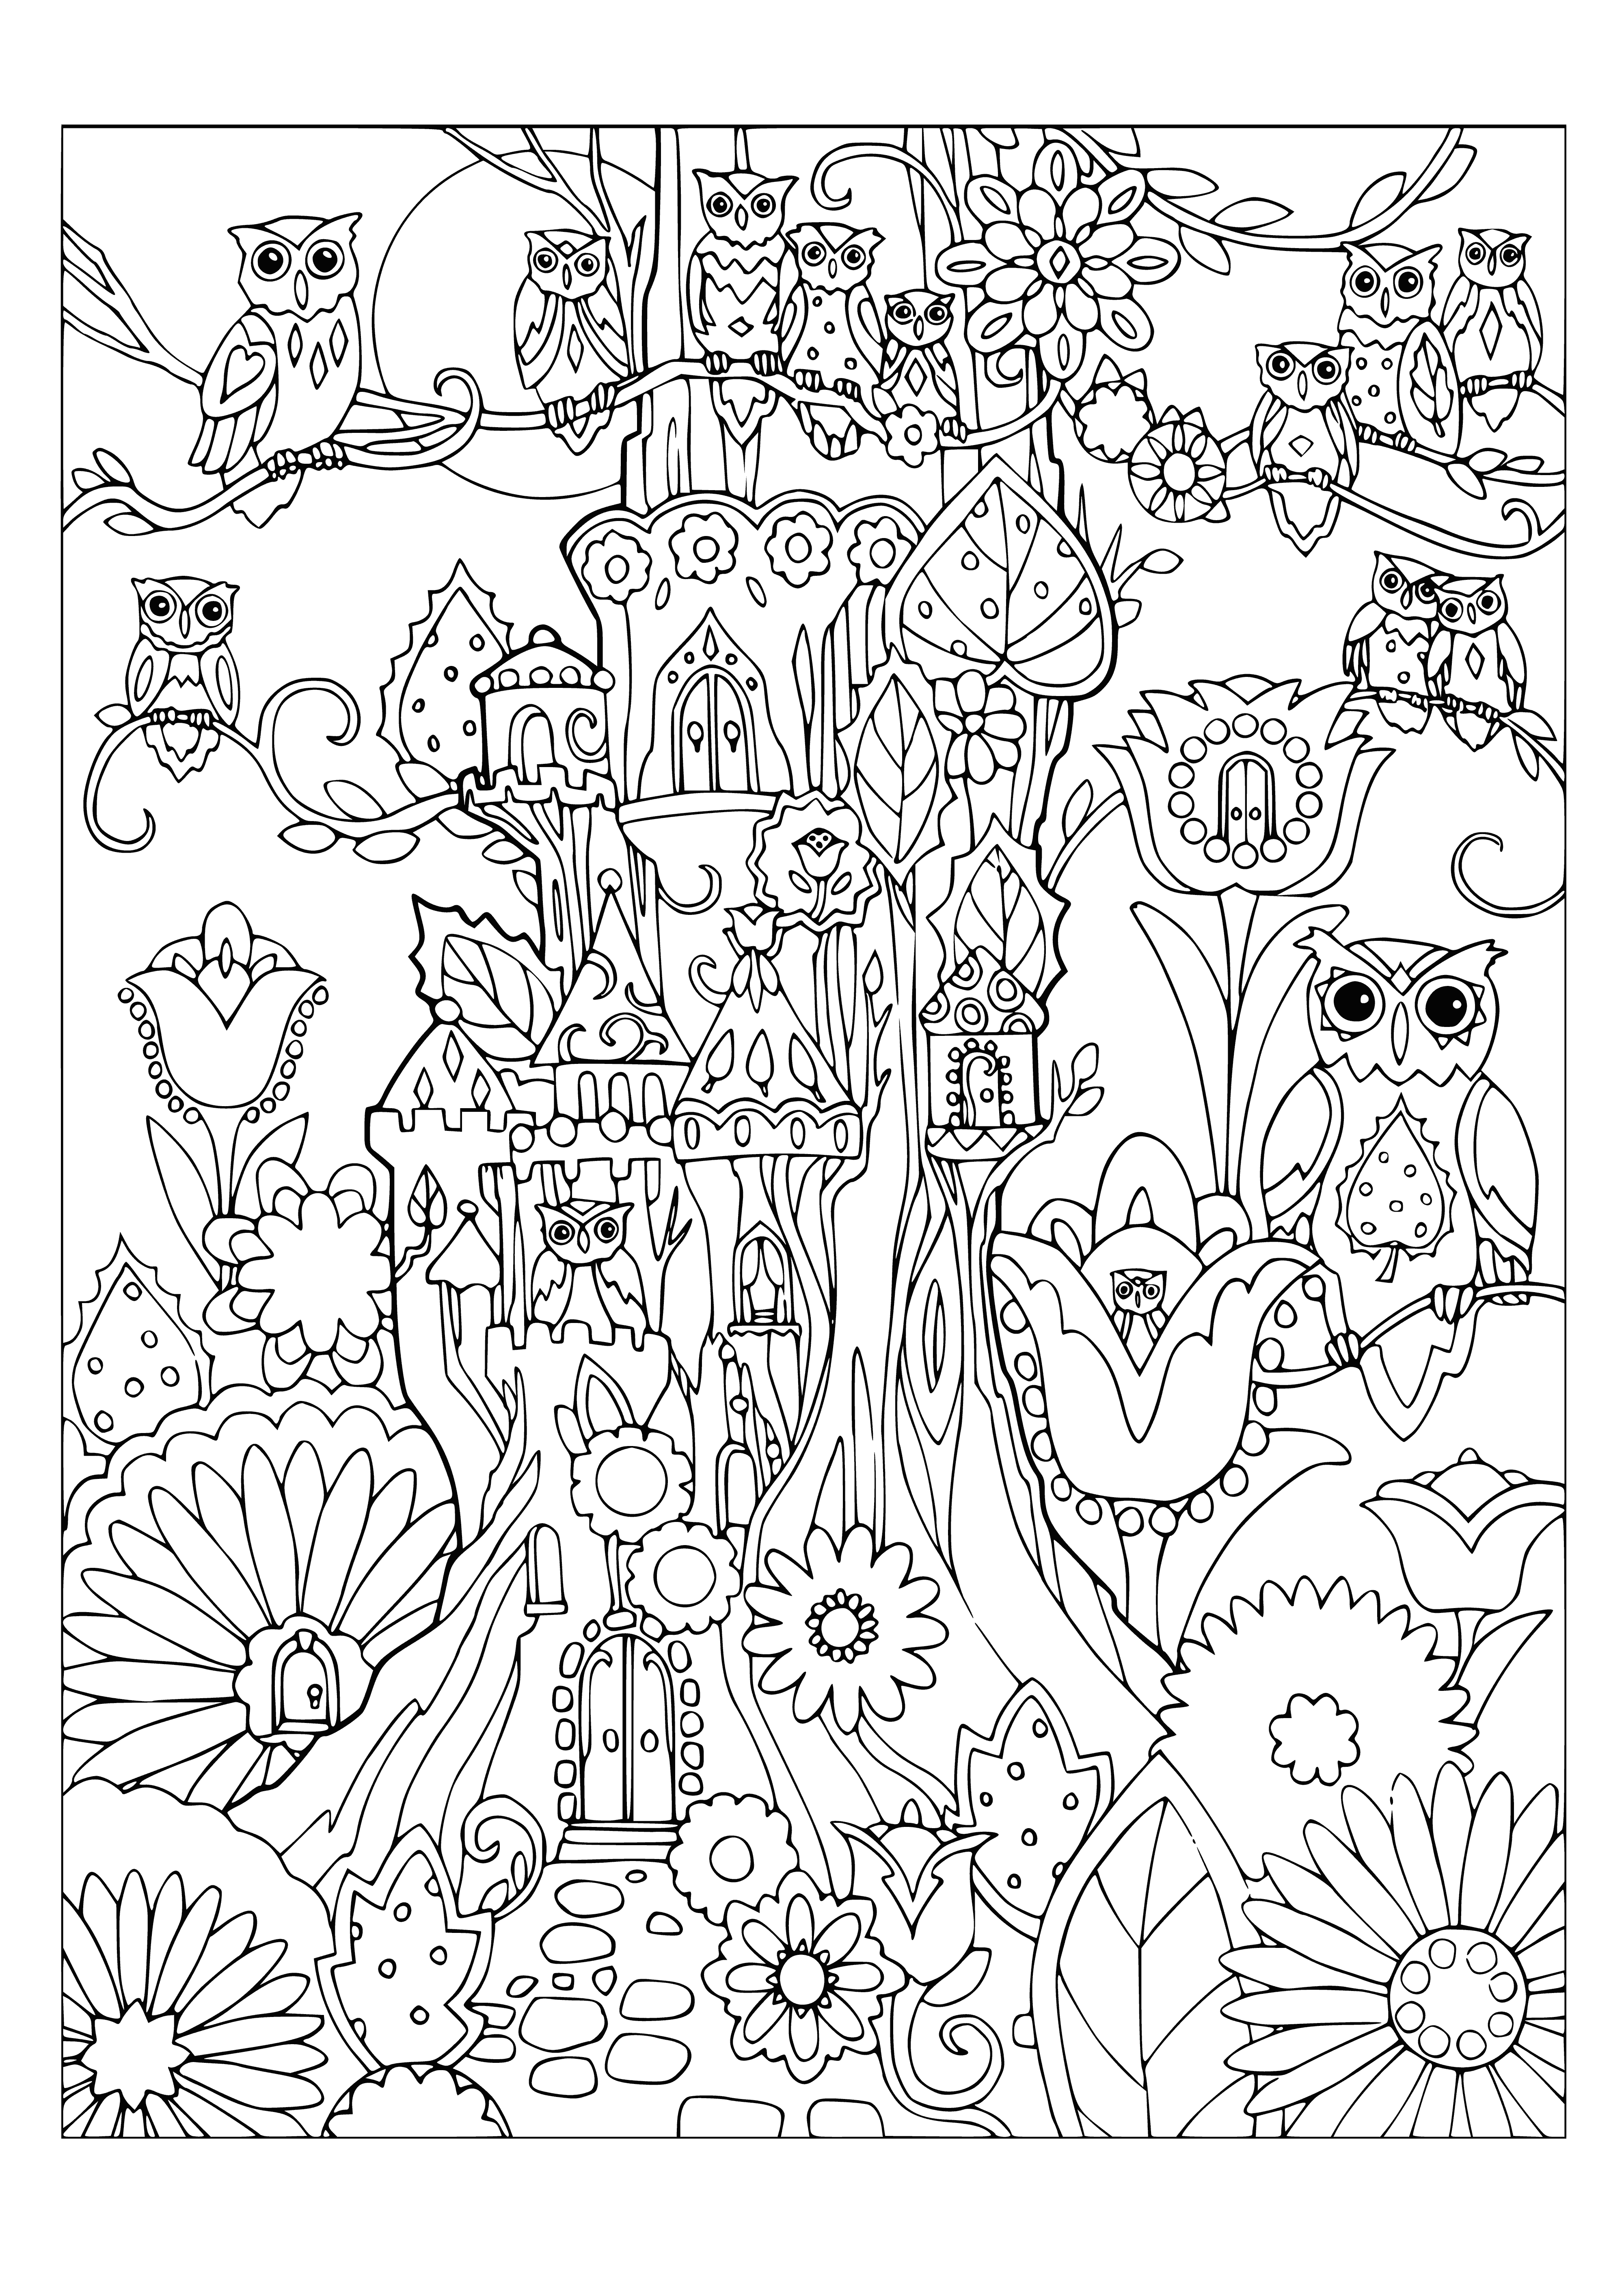 Tree house coloring page